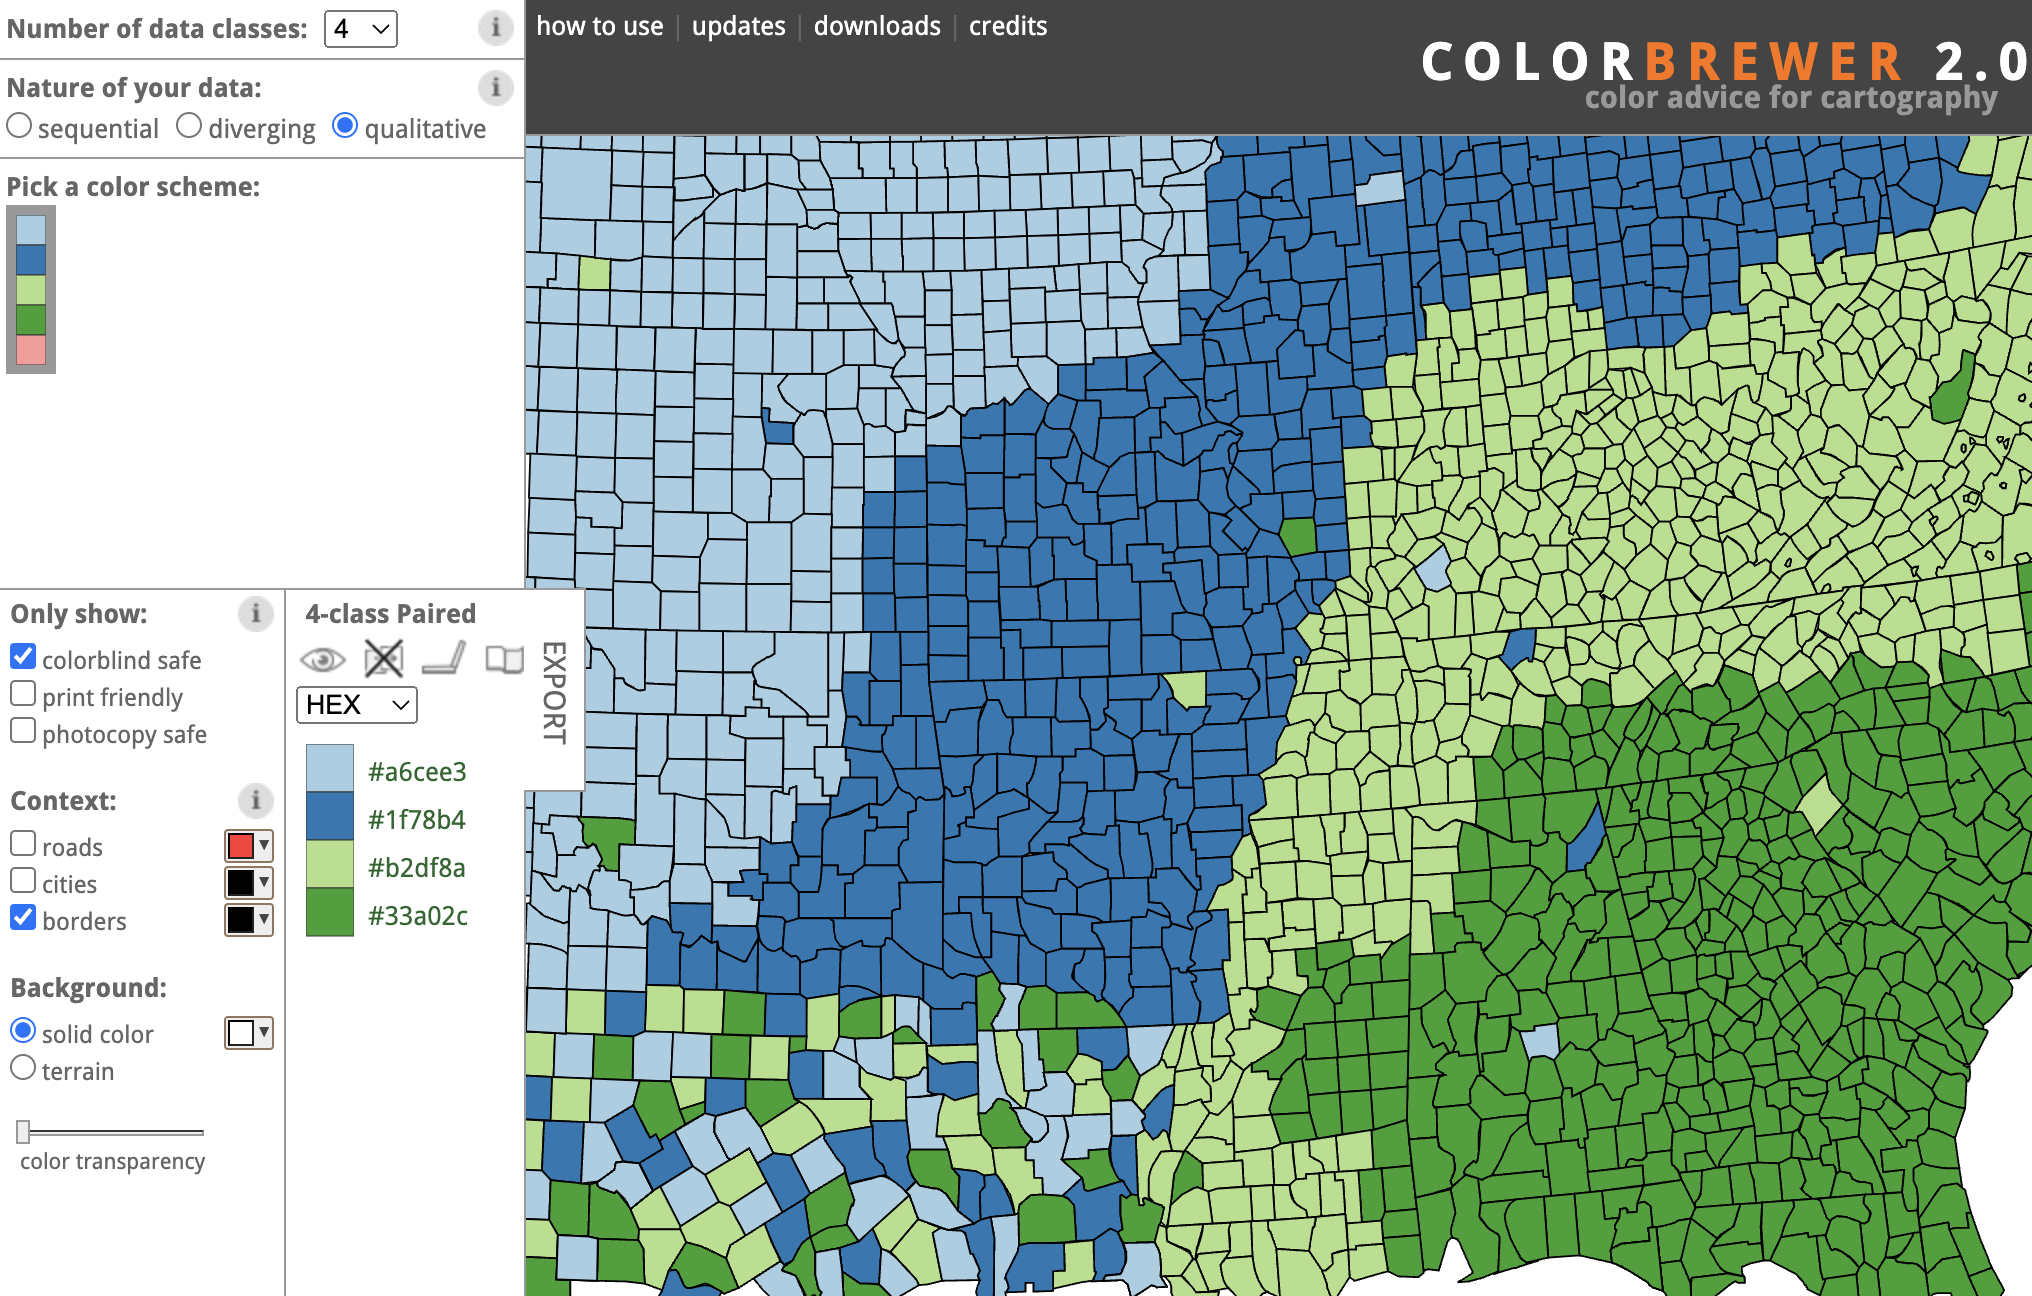 A web browser displaying the Color Brewer interface, showing a 4 colour qualitative colourblind safe palette with greens and blues